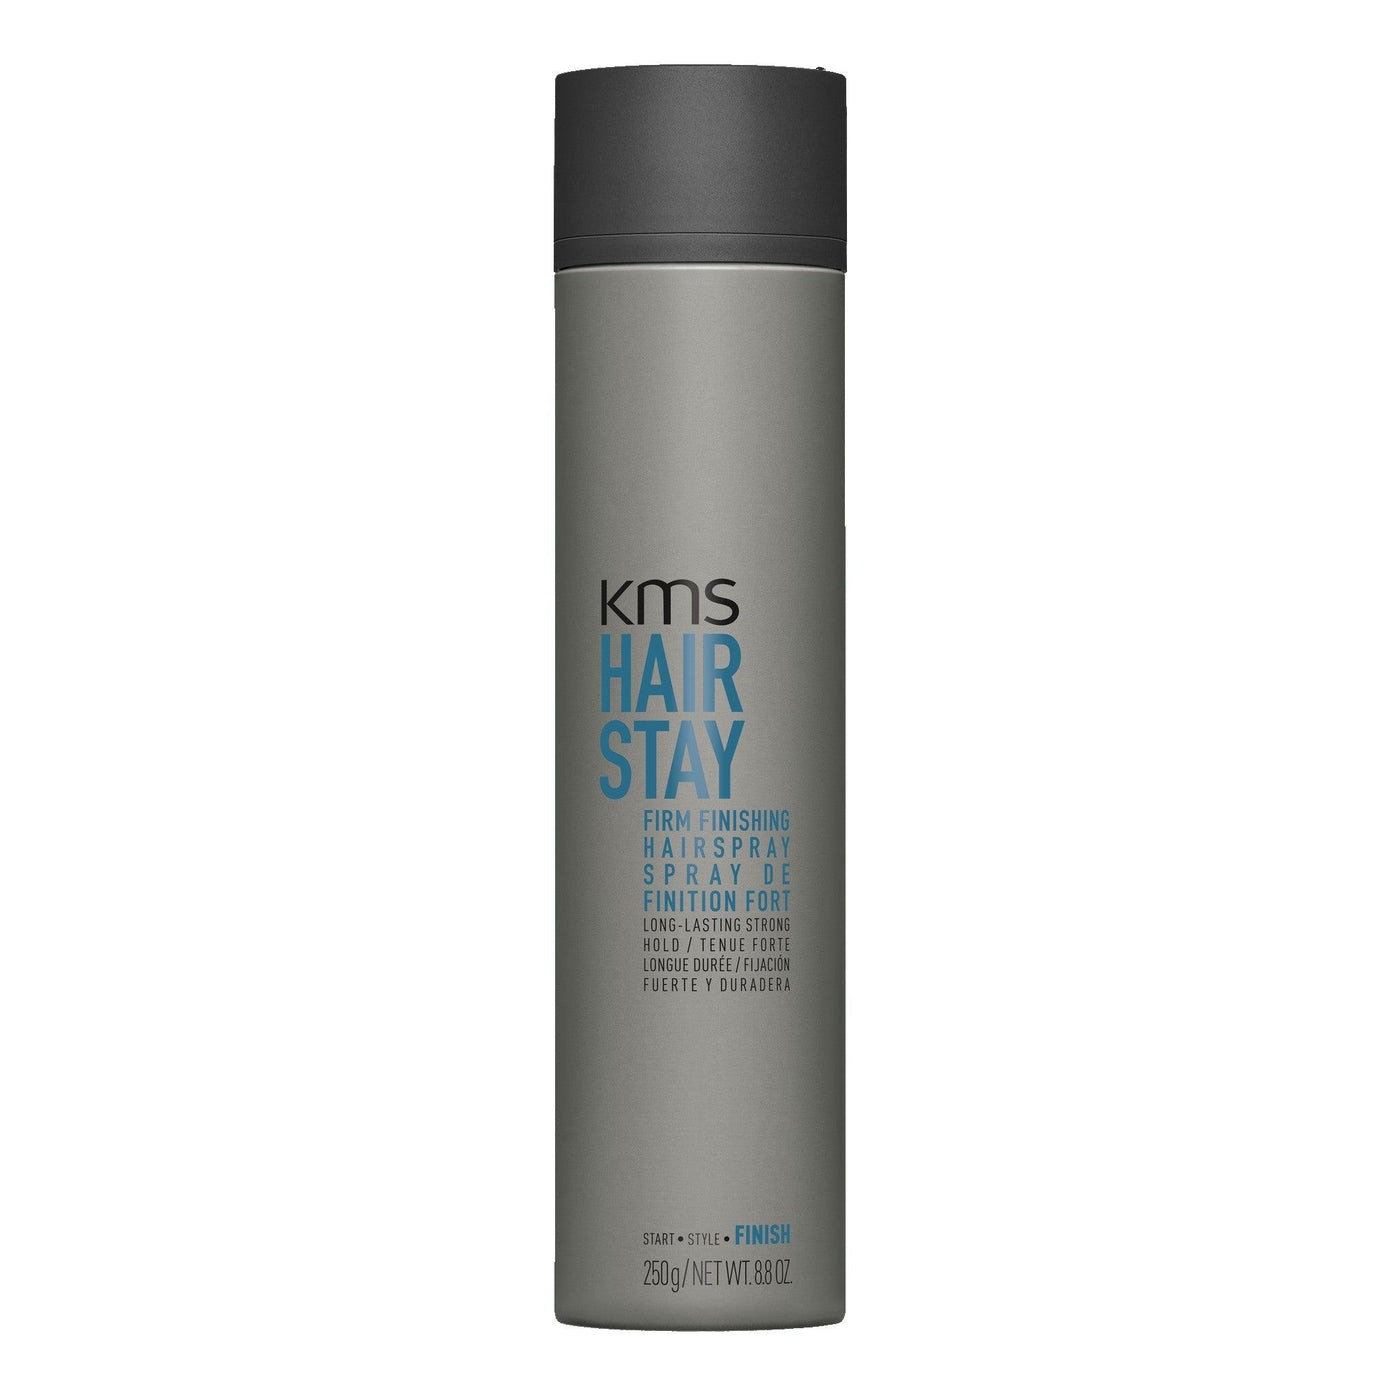 Kms Hairstay Firm Finishing Hairspray 300ml KMS Boutique Deauville